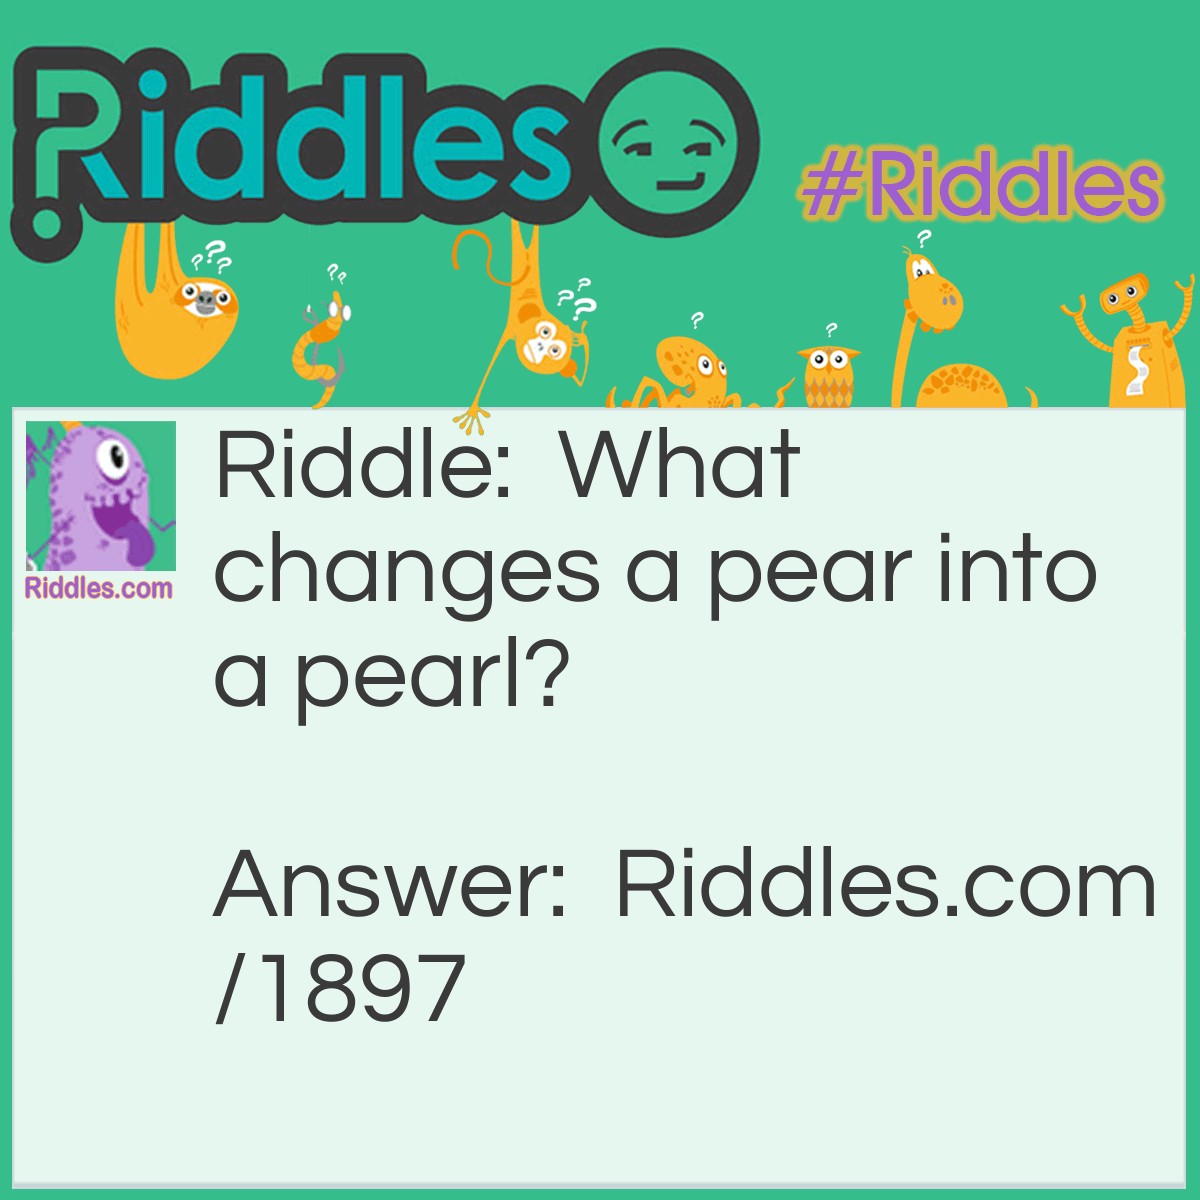 Riddle: What changes a pear into a pearl? Answer: The letter L.